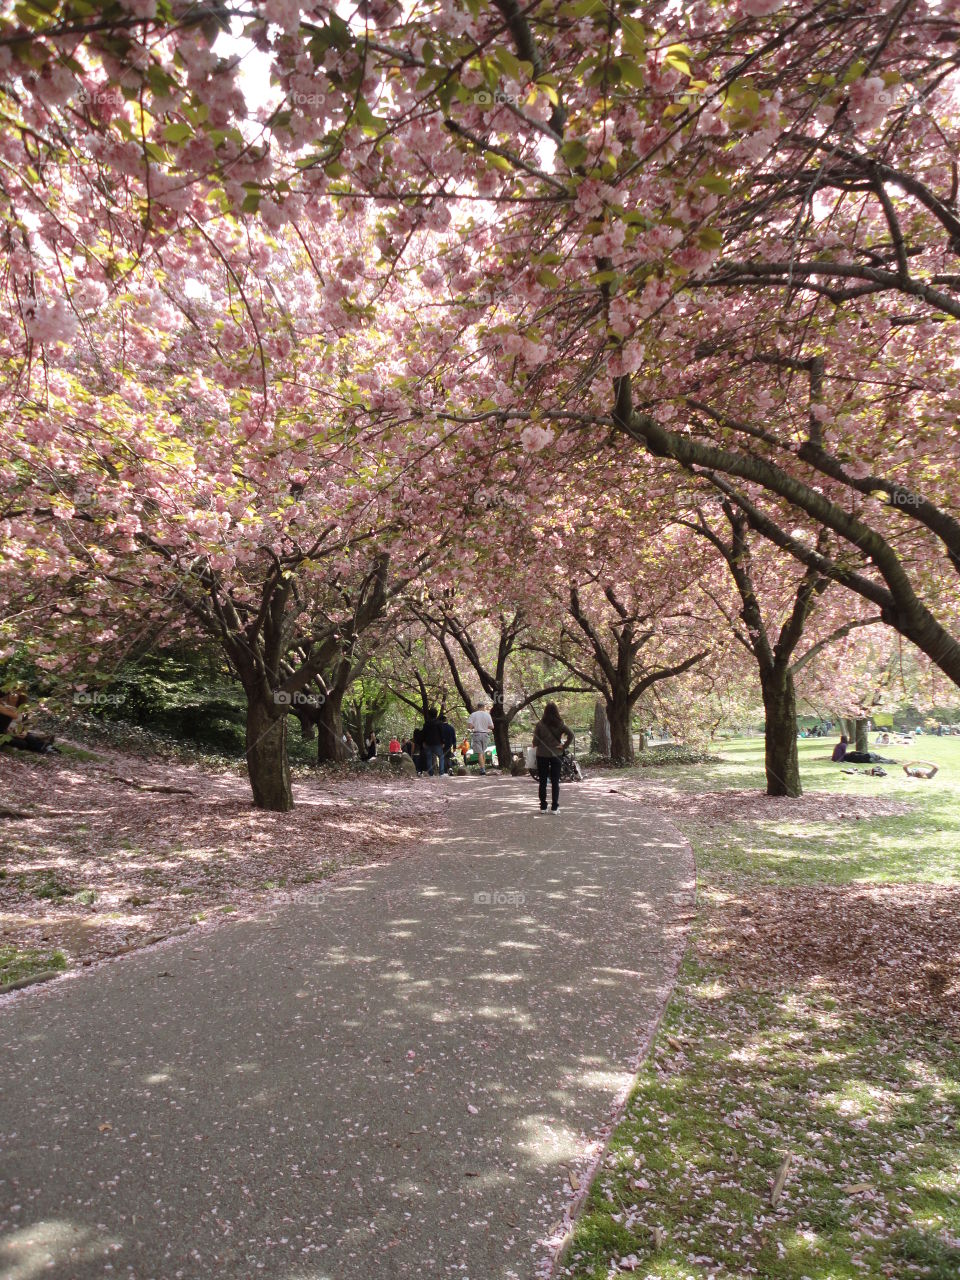 My favorite part of spring? Why the cherry blossoms in bloom of course. Like walking through cotton candy.